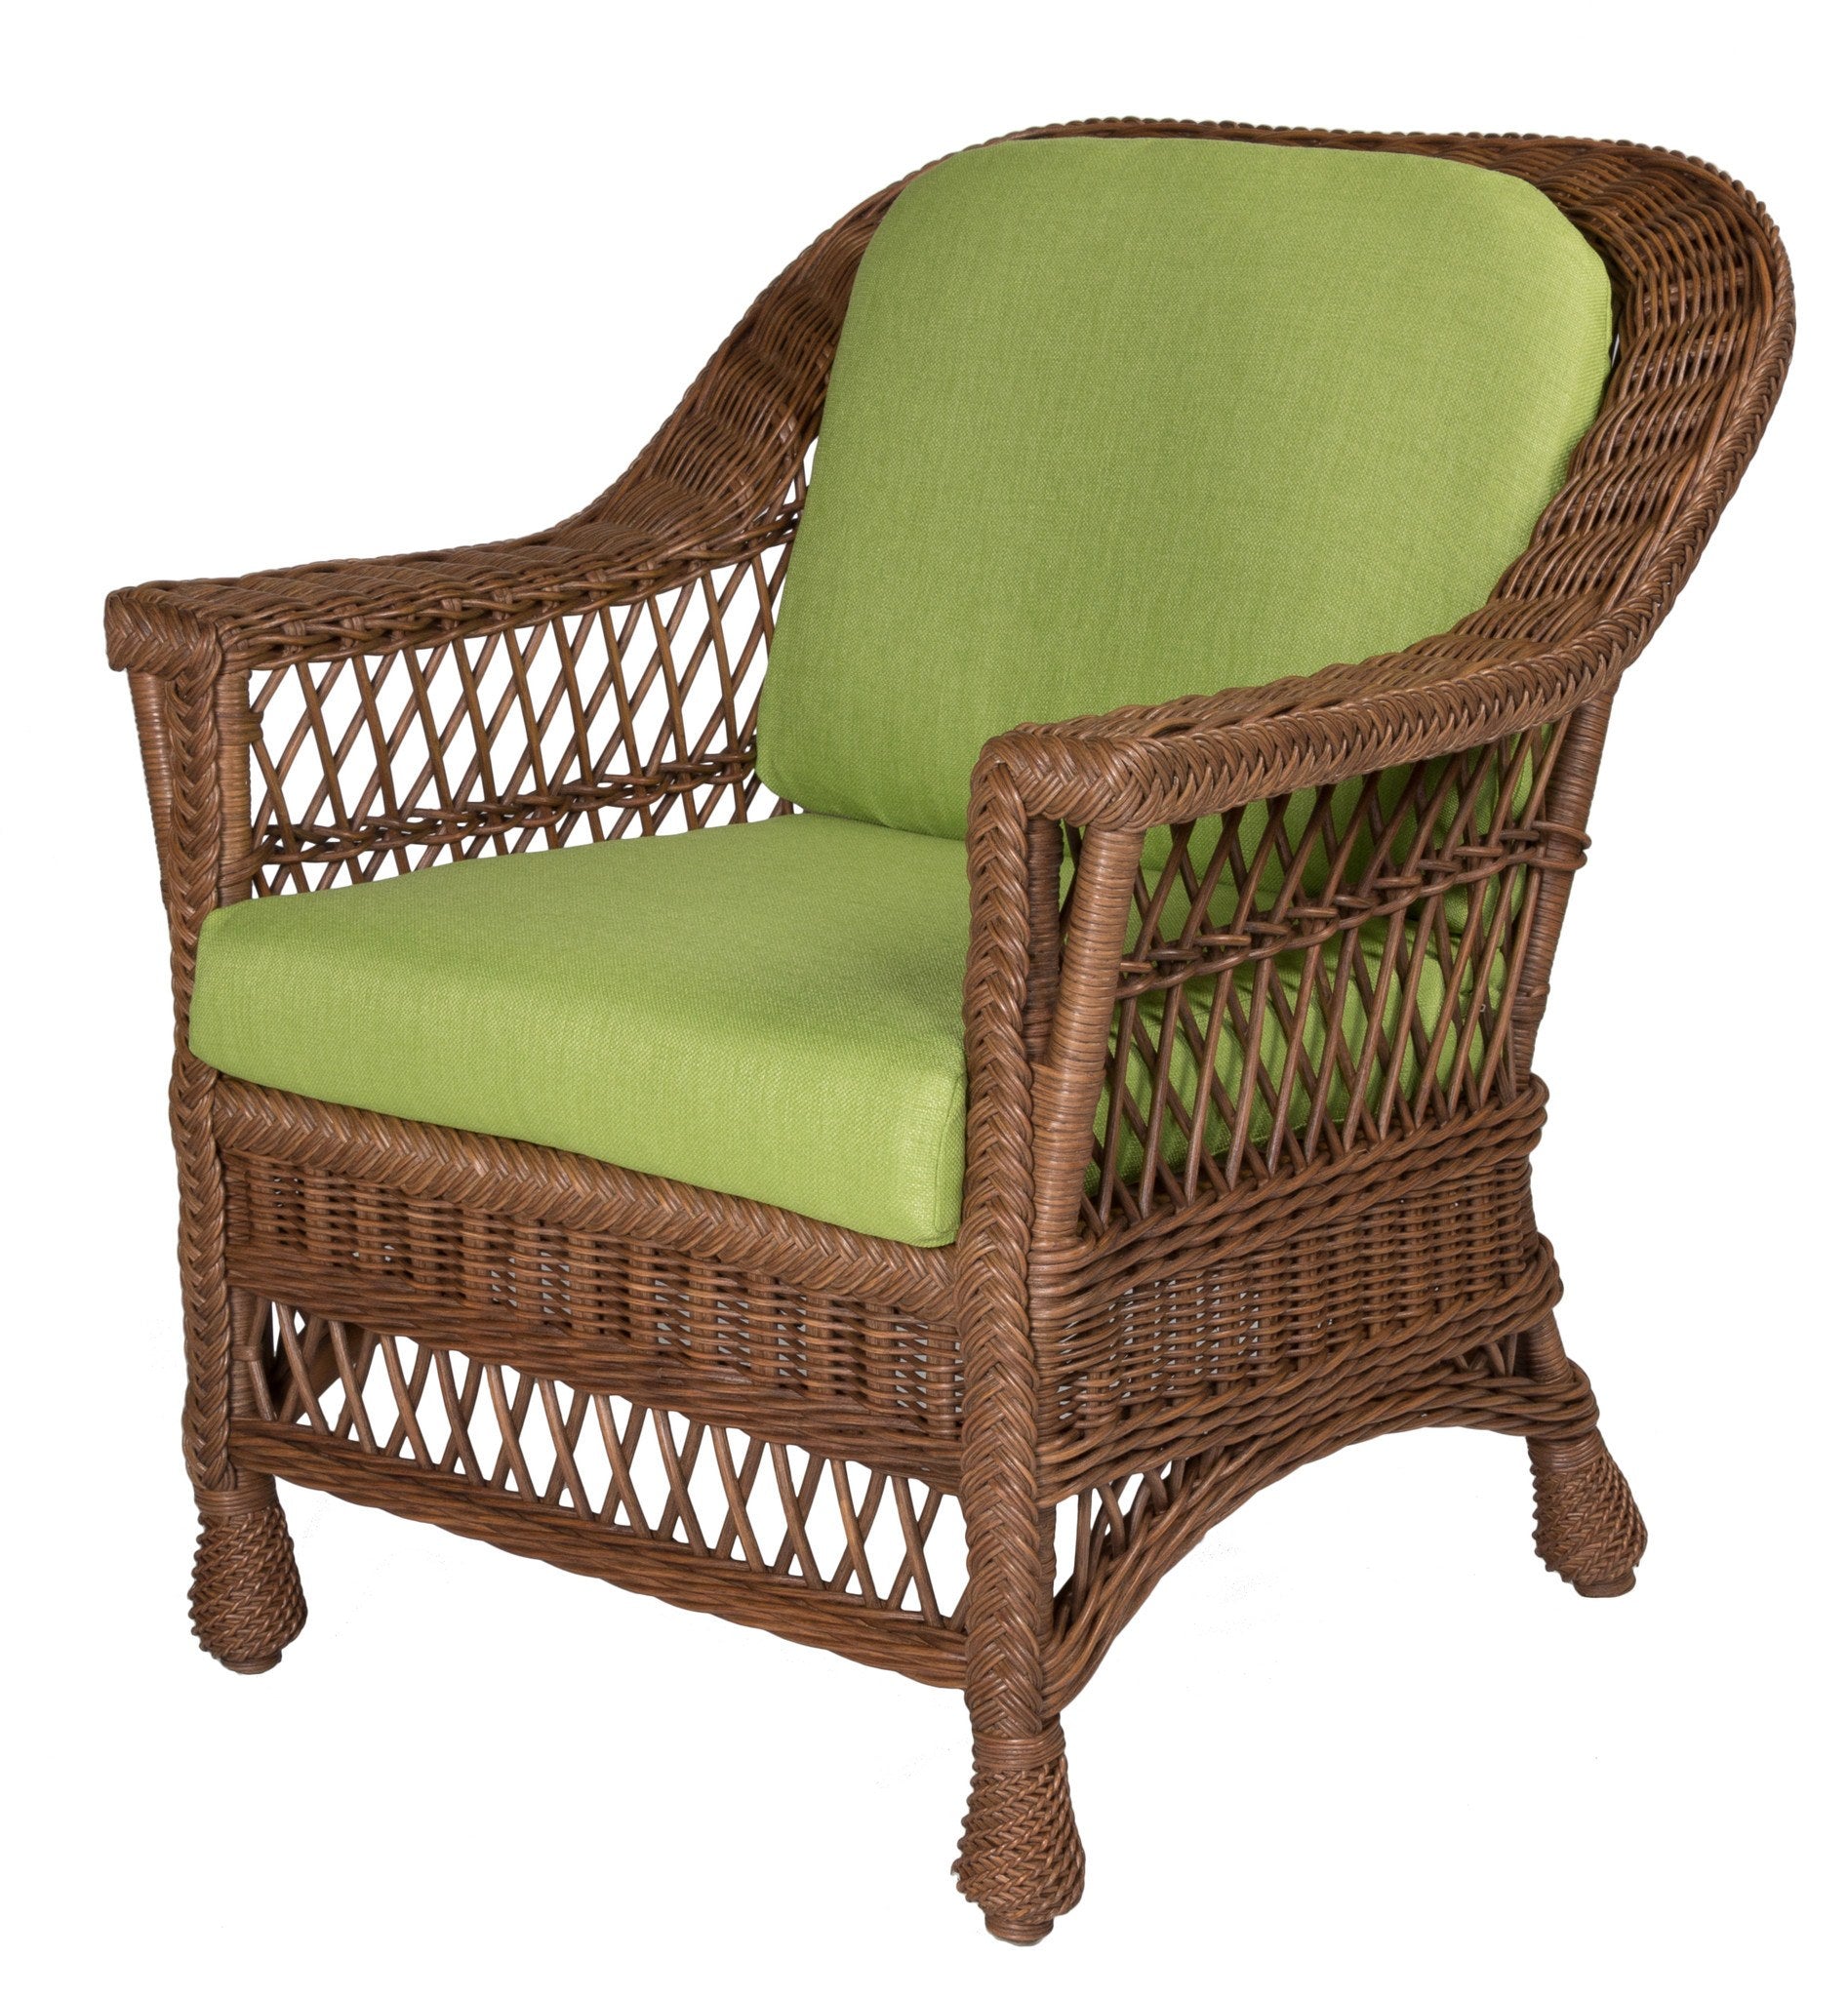 Designer Wicker & Rattan By Tribor Harbor front Arm Chair by Designer Wicker from Tribor Chair - Rattan Imports